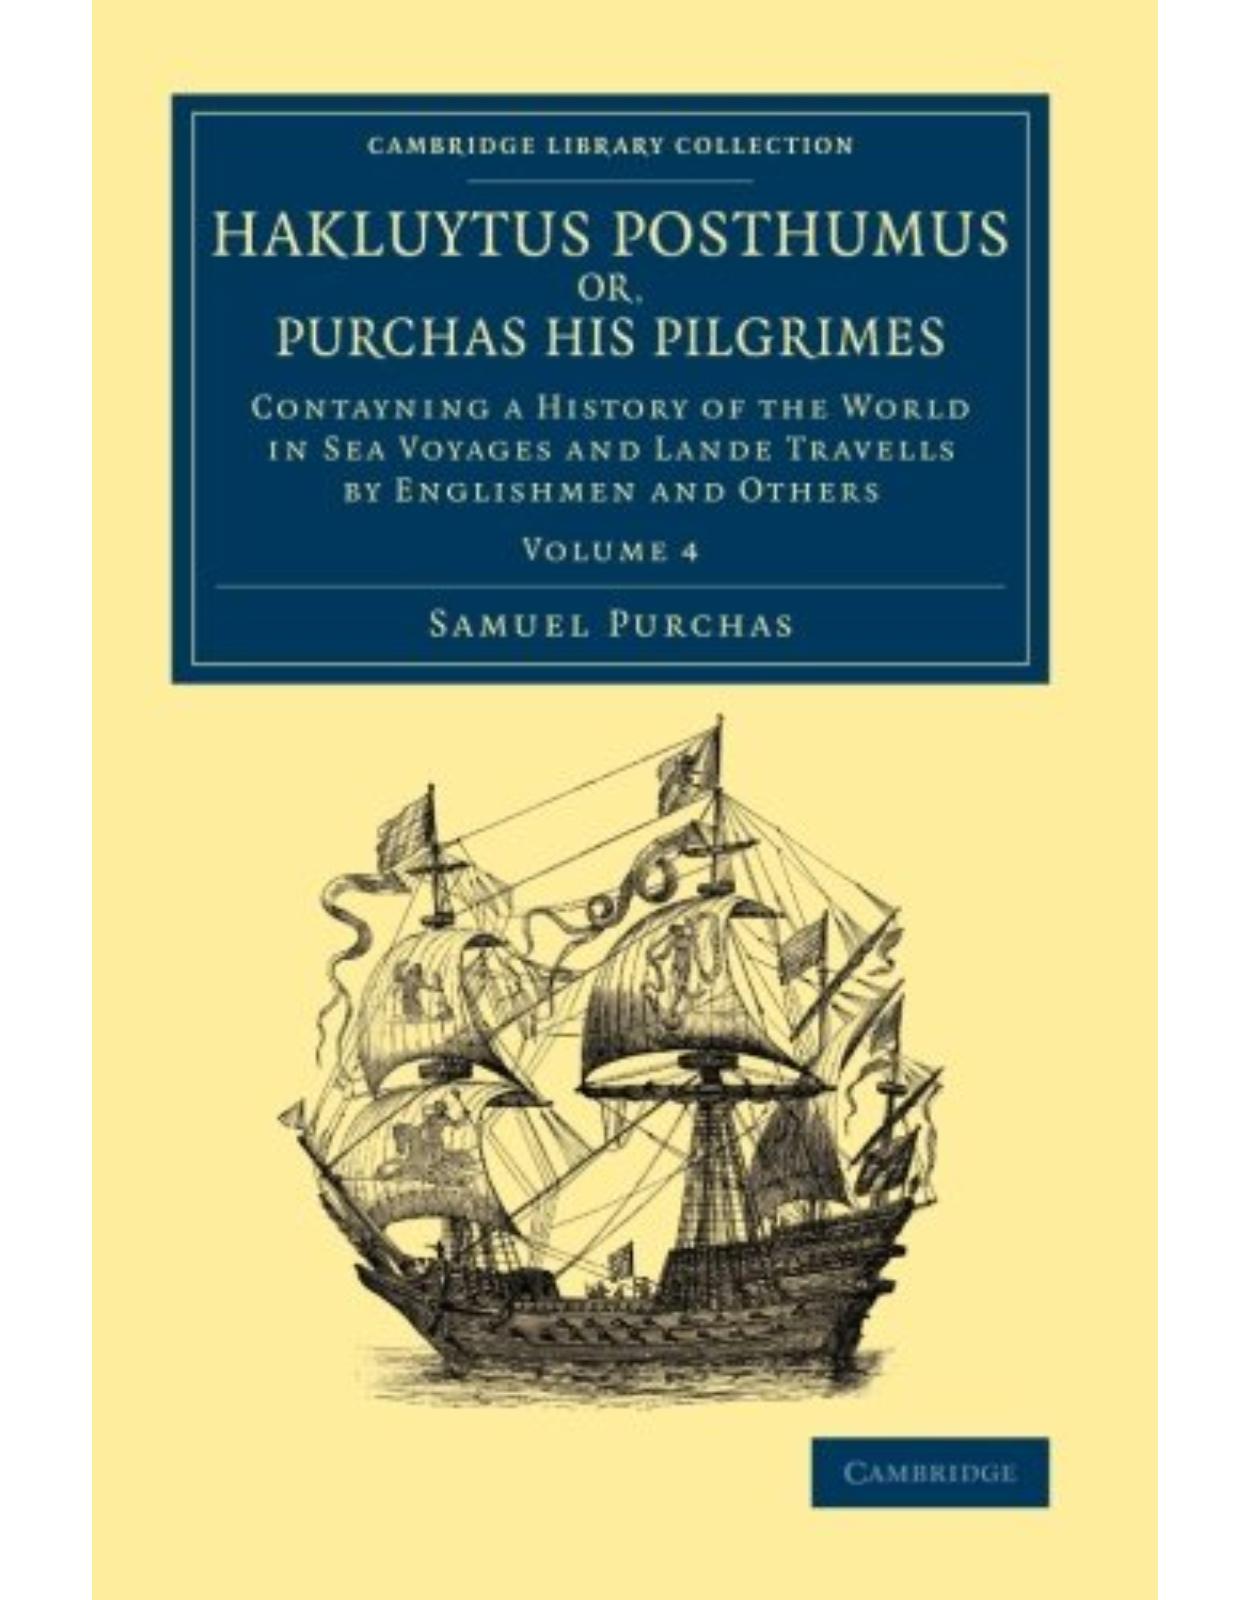 Hakluytus Posthumus or, Purchas his Pilgrimes: Contayning a History of the World in Sea Voyages and Lande Travells by Englishmen and Others (Volume 4)